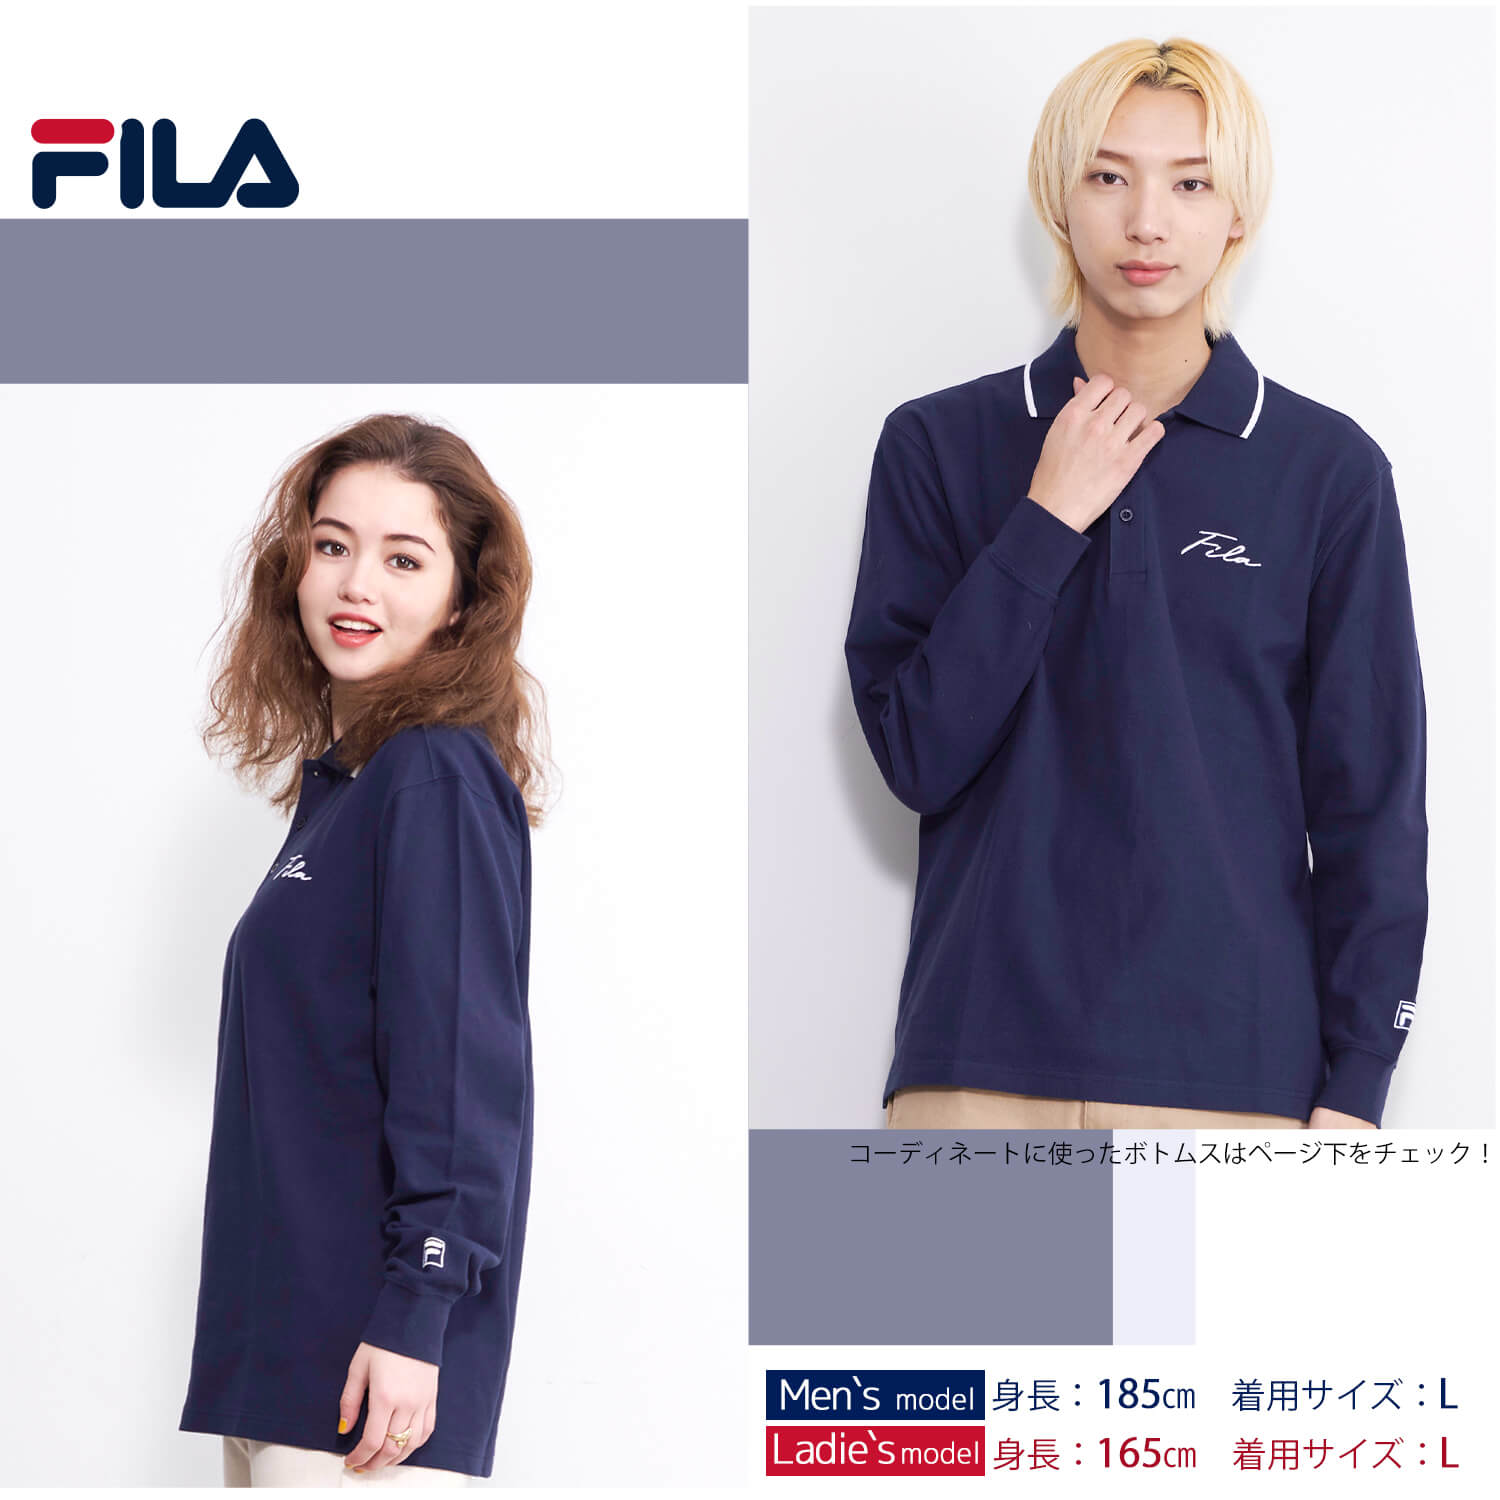 FILA フィラ ポロシャツ 長袖 メンズ 綿 無地 鹿の子 大きいサイズ 4L 5L 筆記体ロゴ 刺繍 衿ライン karlas｜outfit-style｜04